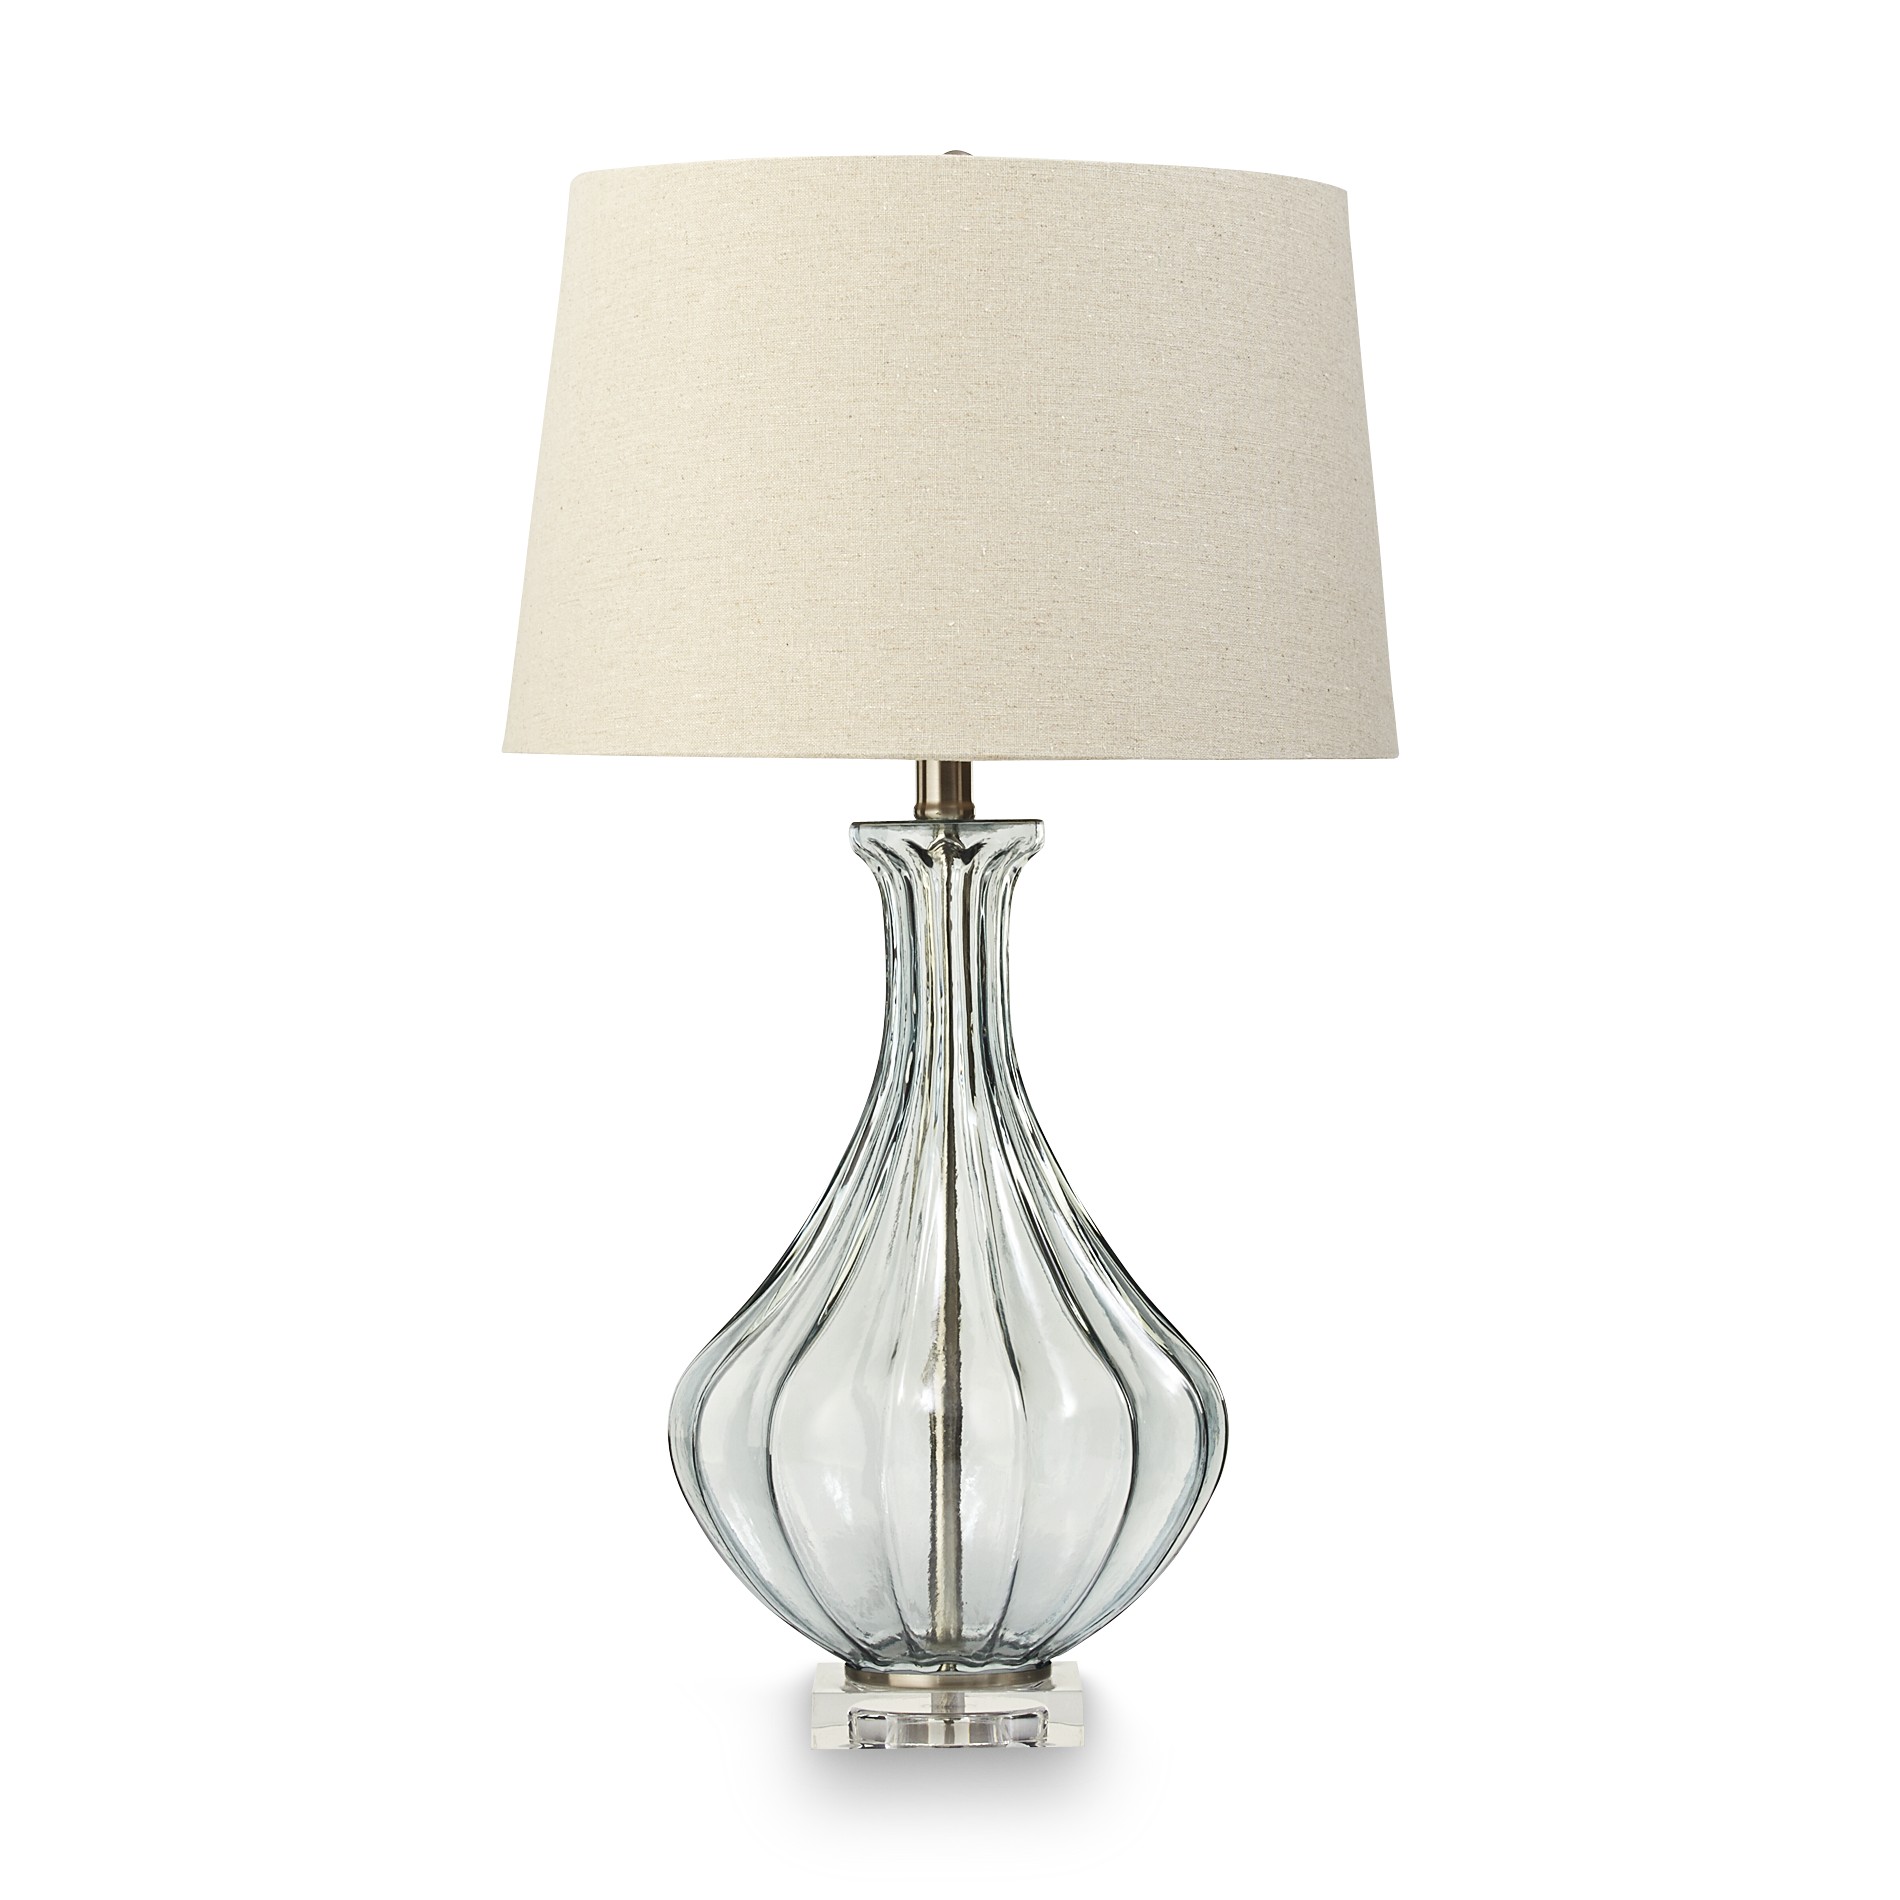 Table Lamps | Nightstand Lamps - Kmart